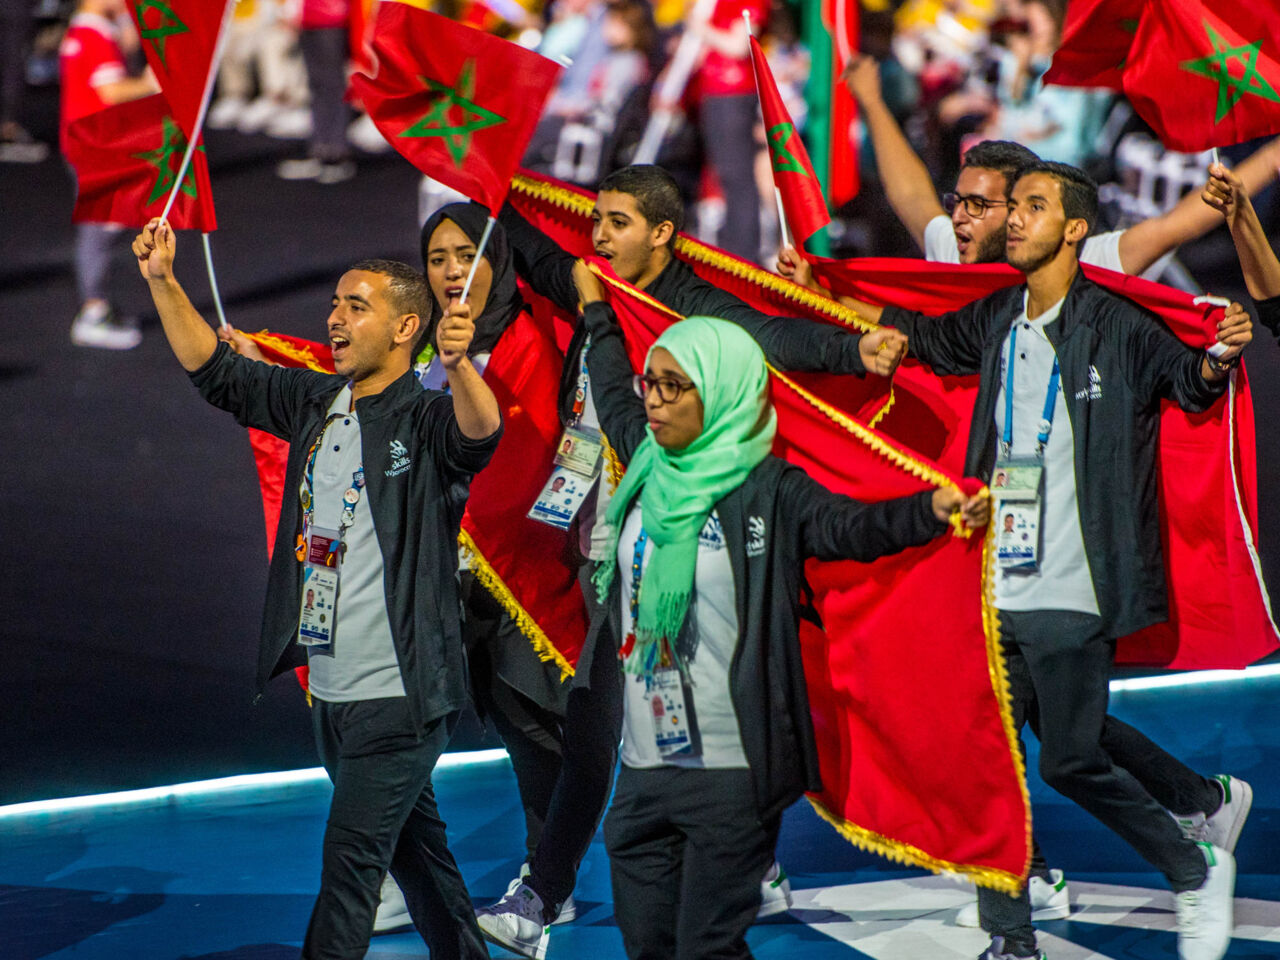 Yoursa Assali holding a Moroccan flag as part of the country's team during the Opening Ceremony at WorldSkills Kazan 2019 in Russia.
